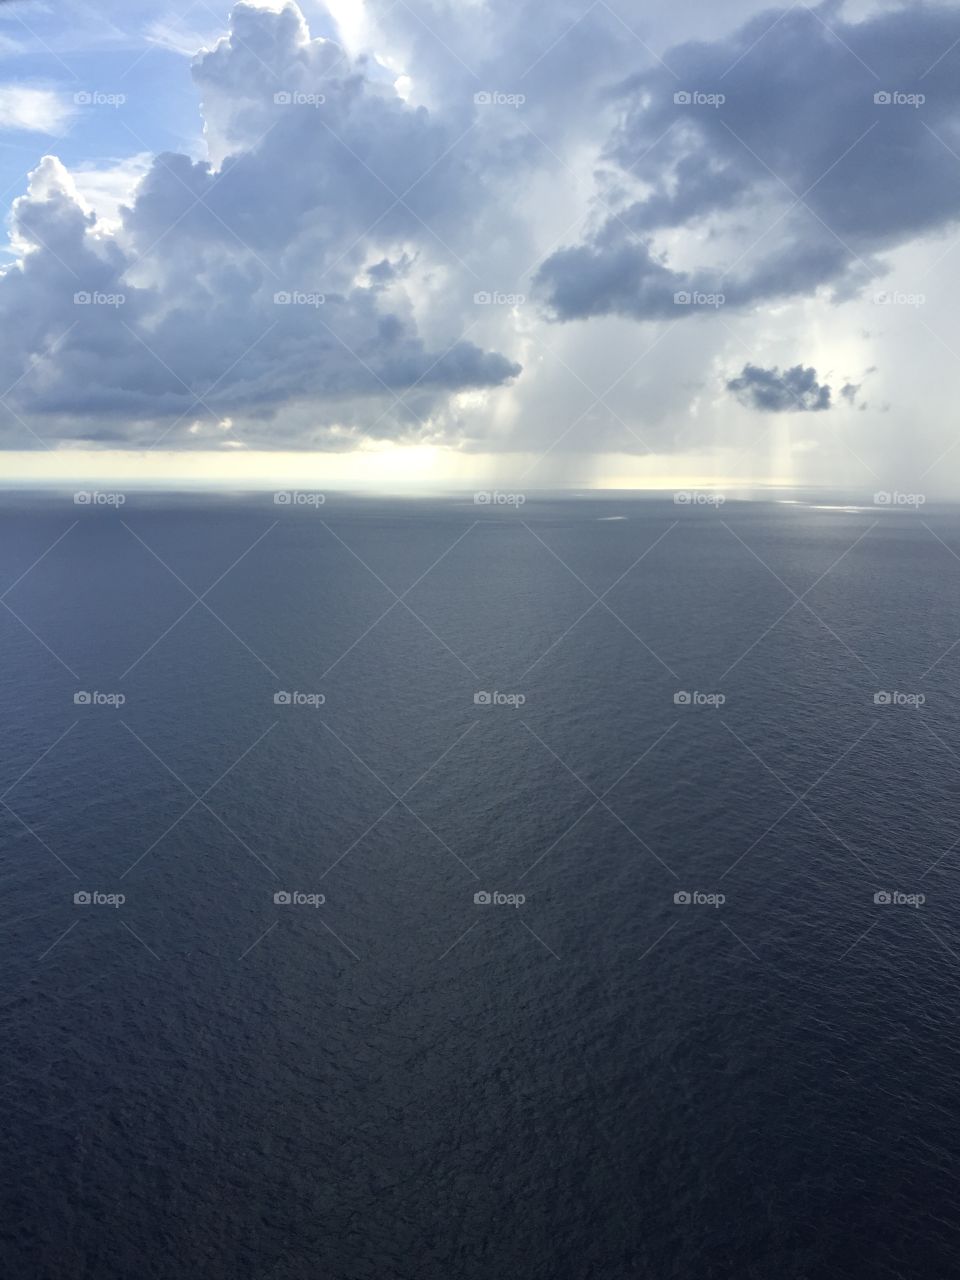 Helicopter view of the Gulf of Mexico with a few scattered showers 